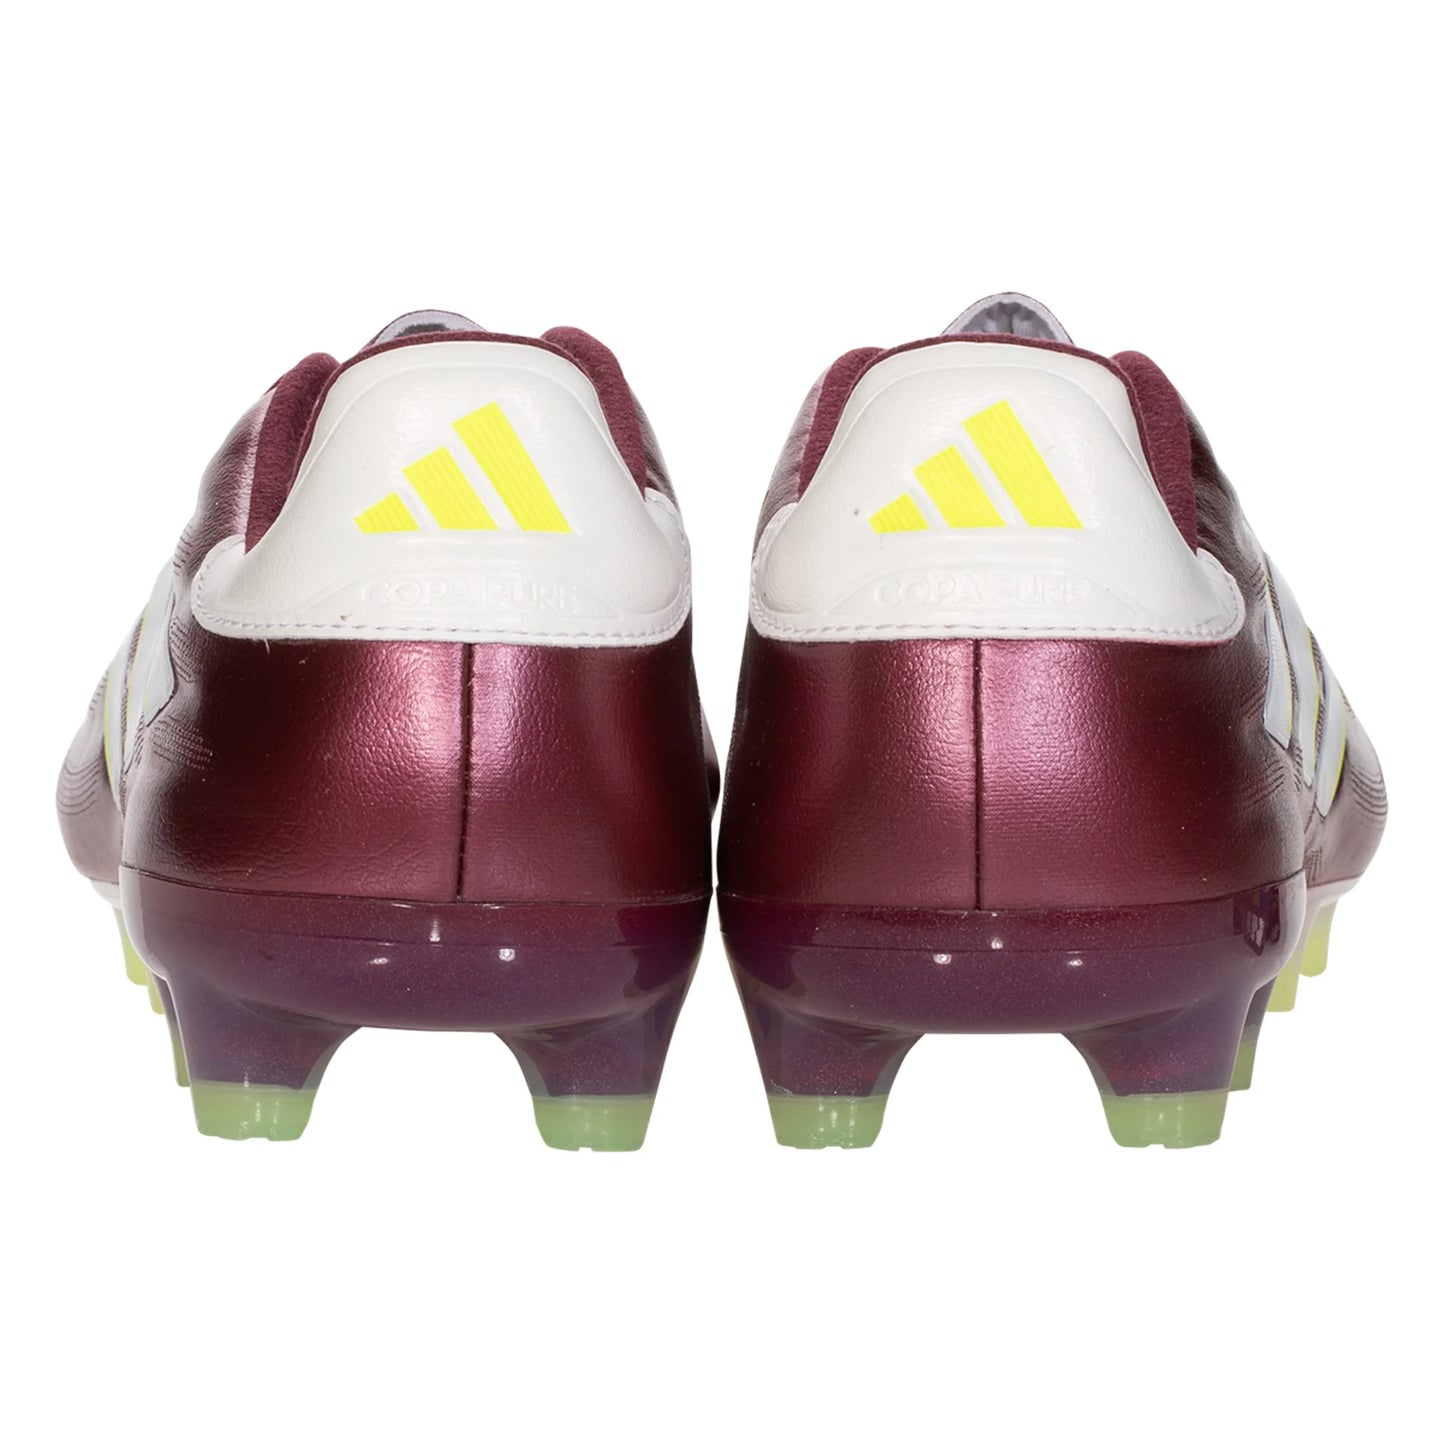 adidas Copa Pure 2 Elite FG Firm Ground Soccer Cleat